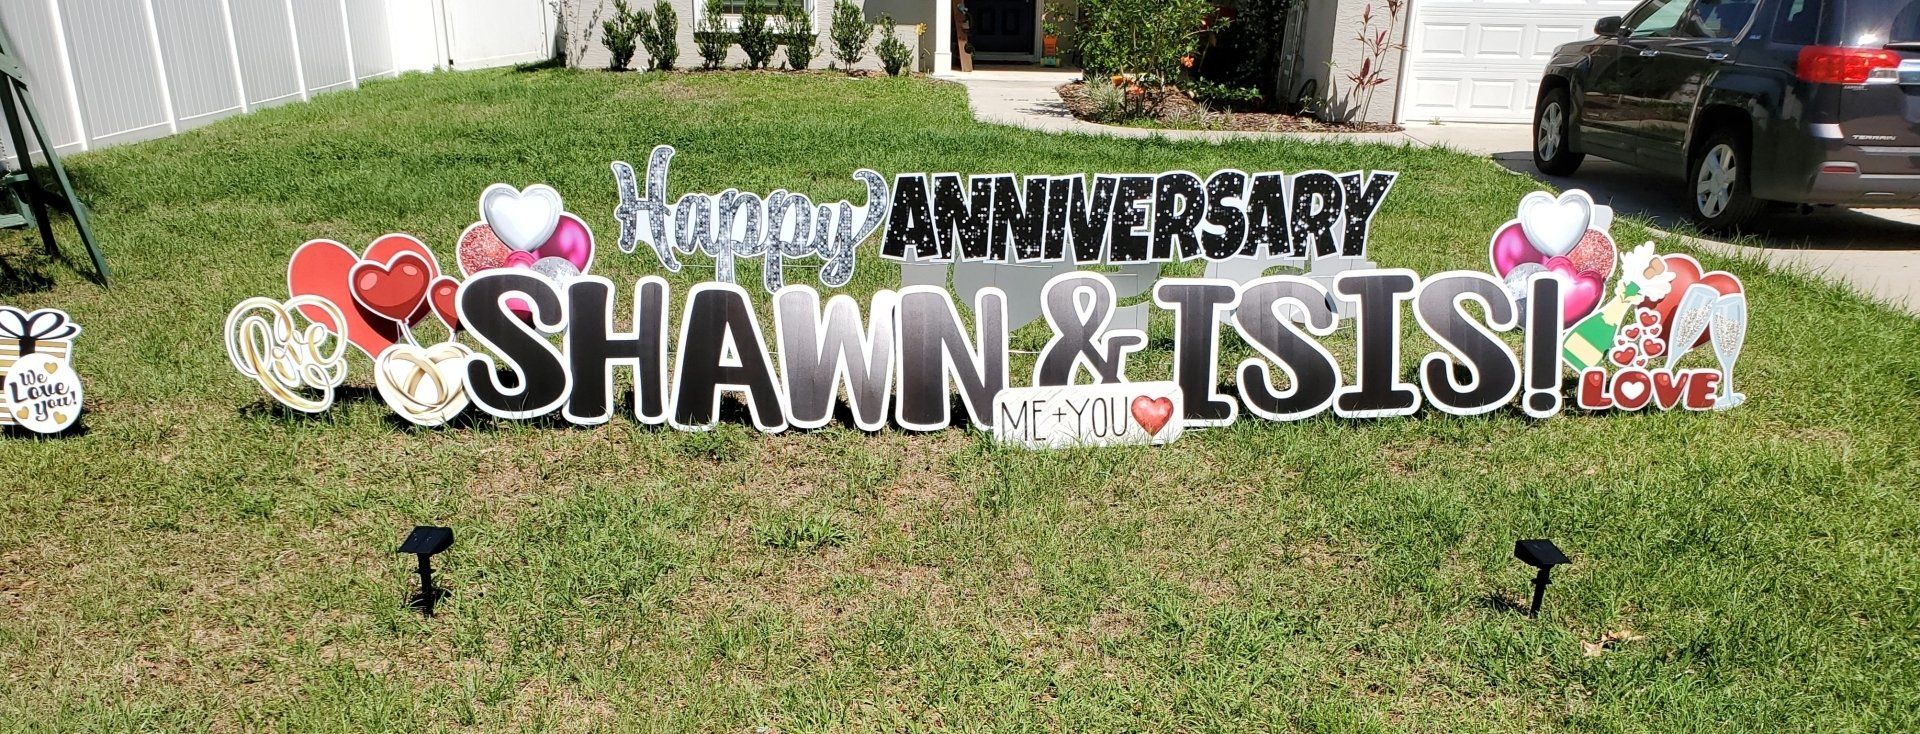 Anniversary Yard card in The Villages Florida